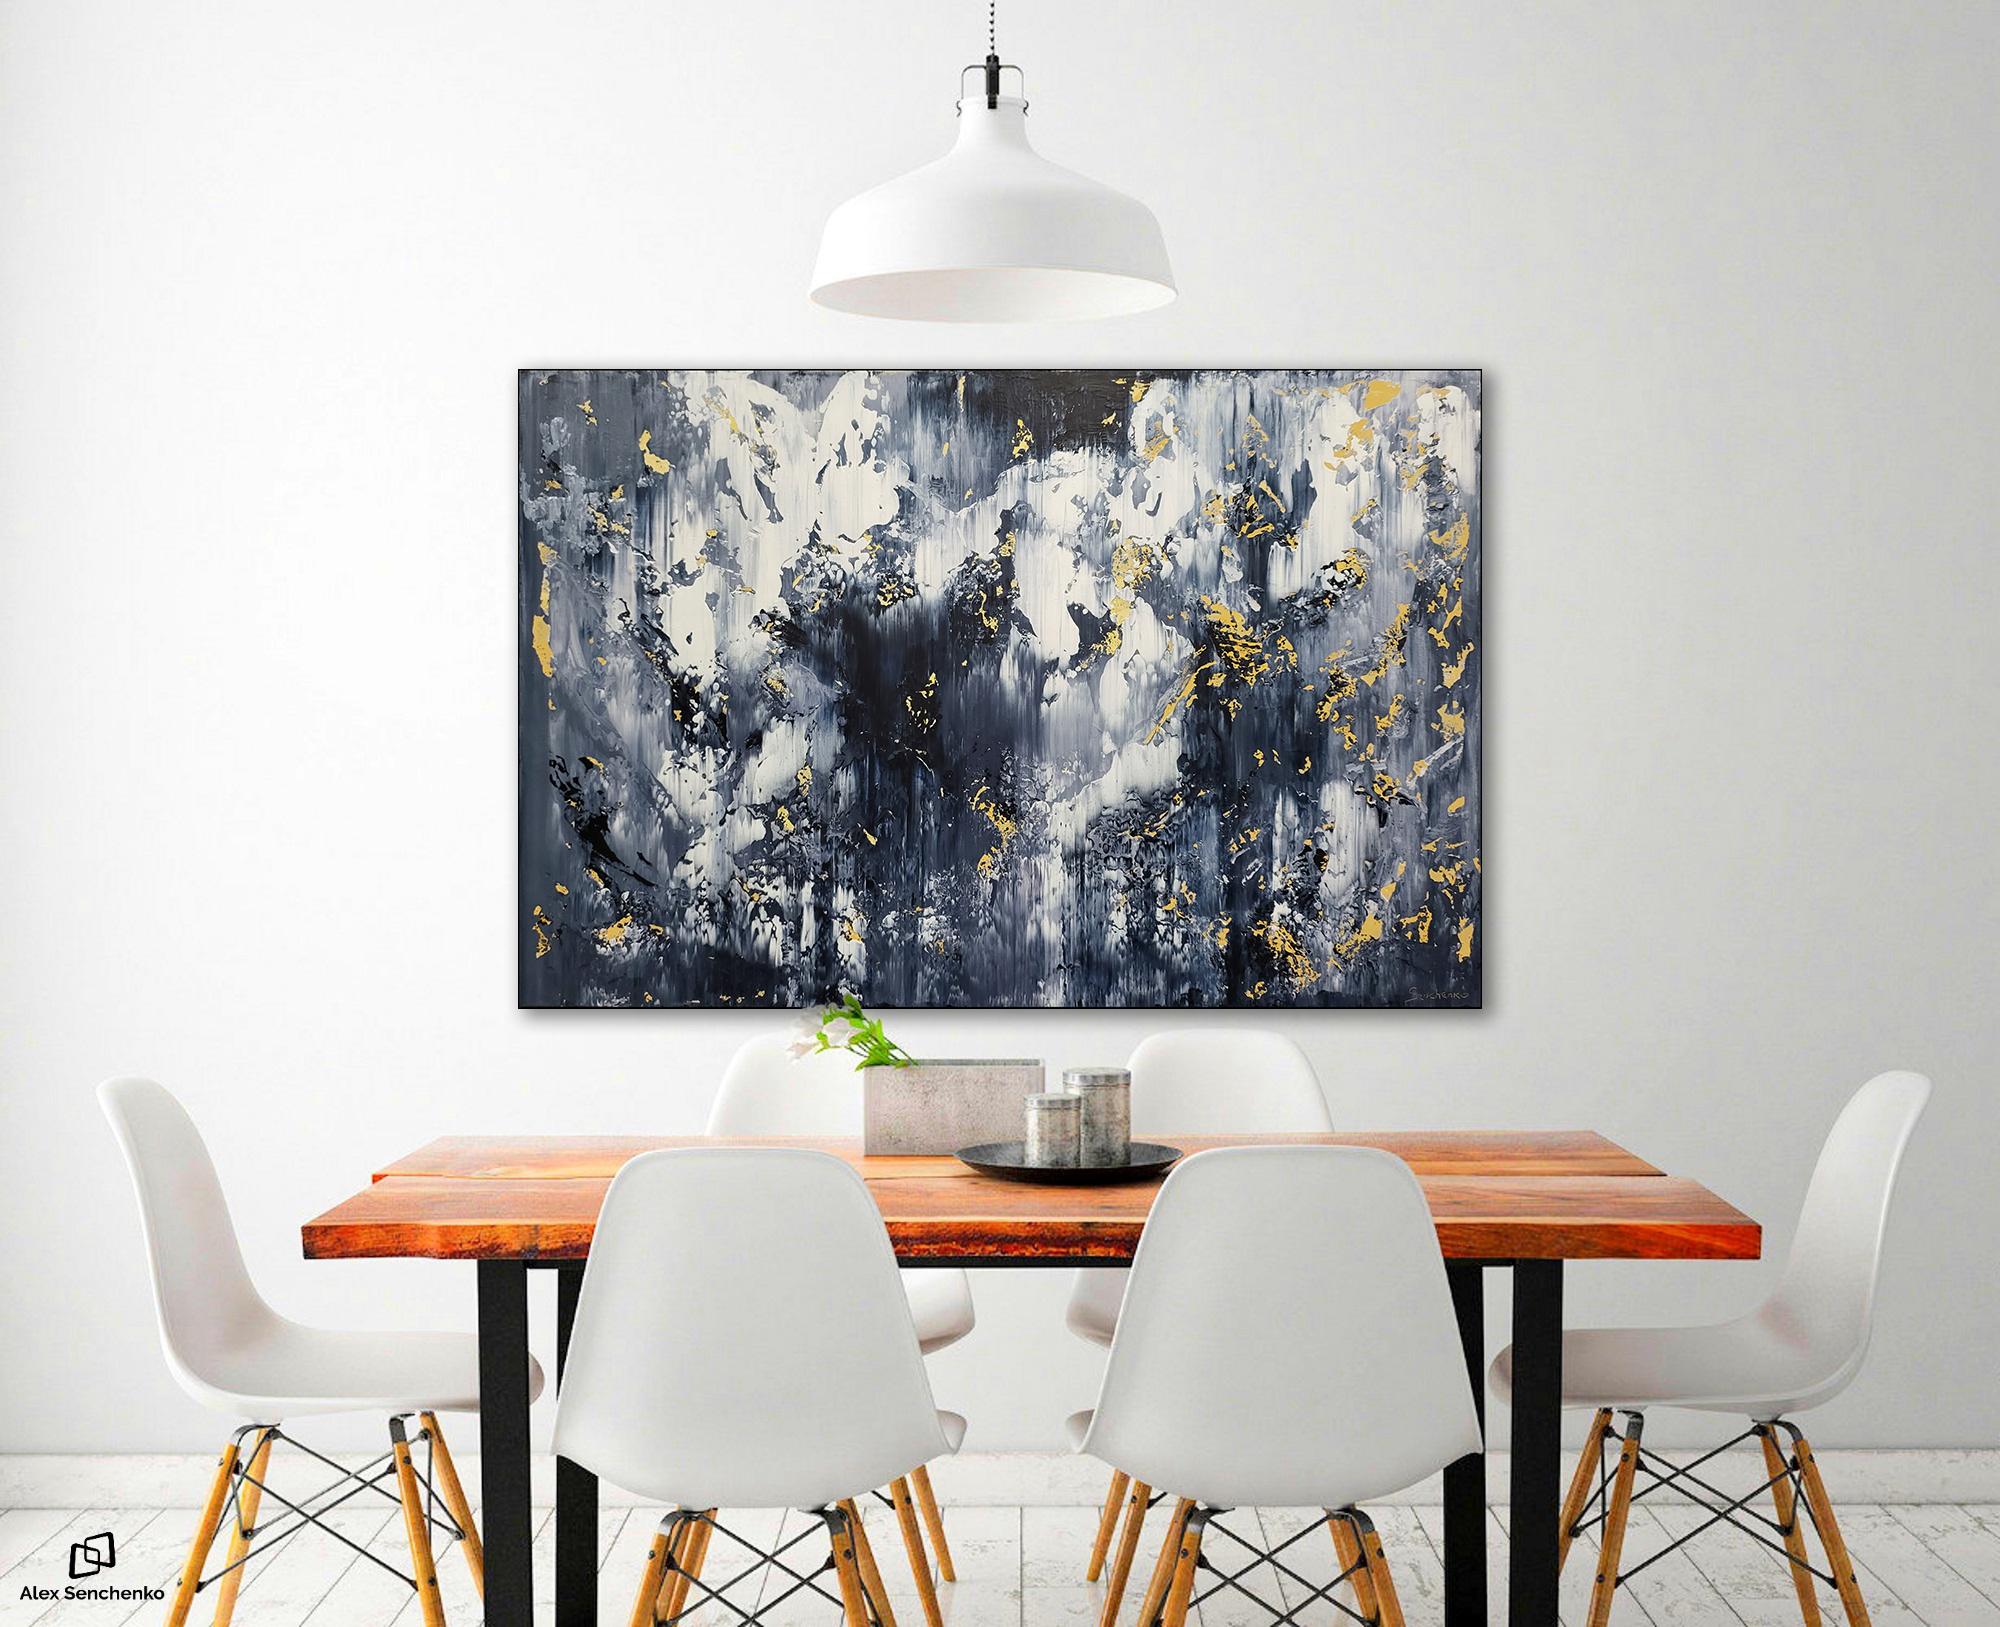 There’s something ethereal, almost magical, about contemporary paintings. The incredible Expressionism bleeds through the canvas, transforming any room into an entirely new experience. Alex Senchenko’s - Abstract 2331 - painting will give your space